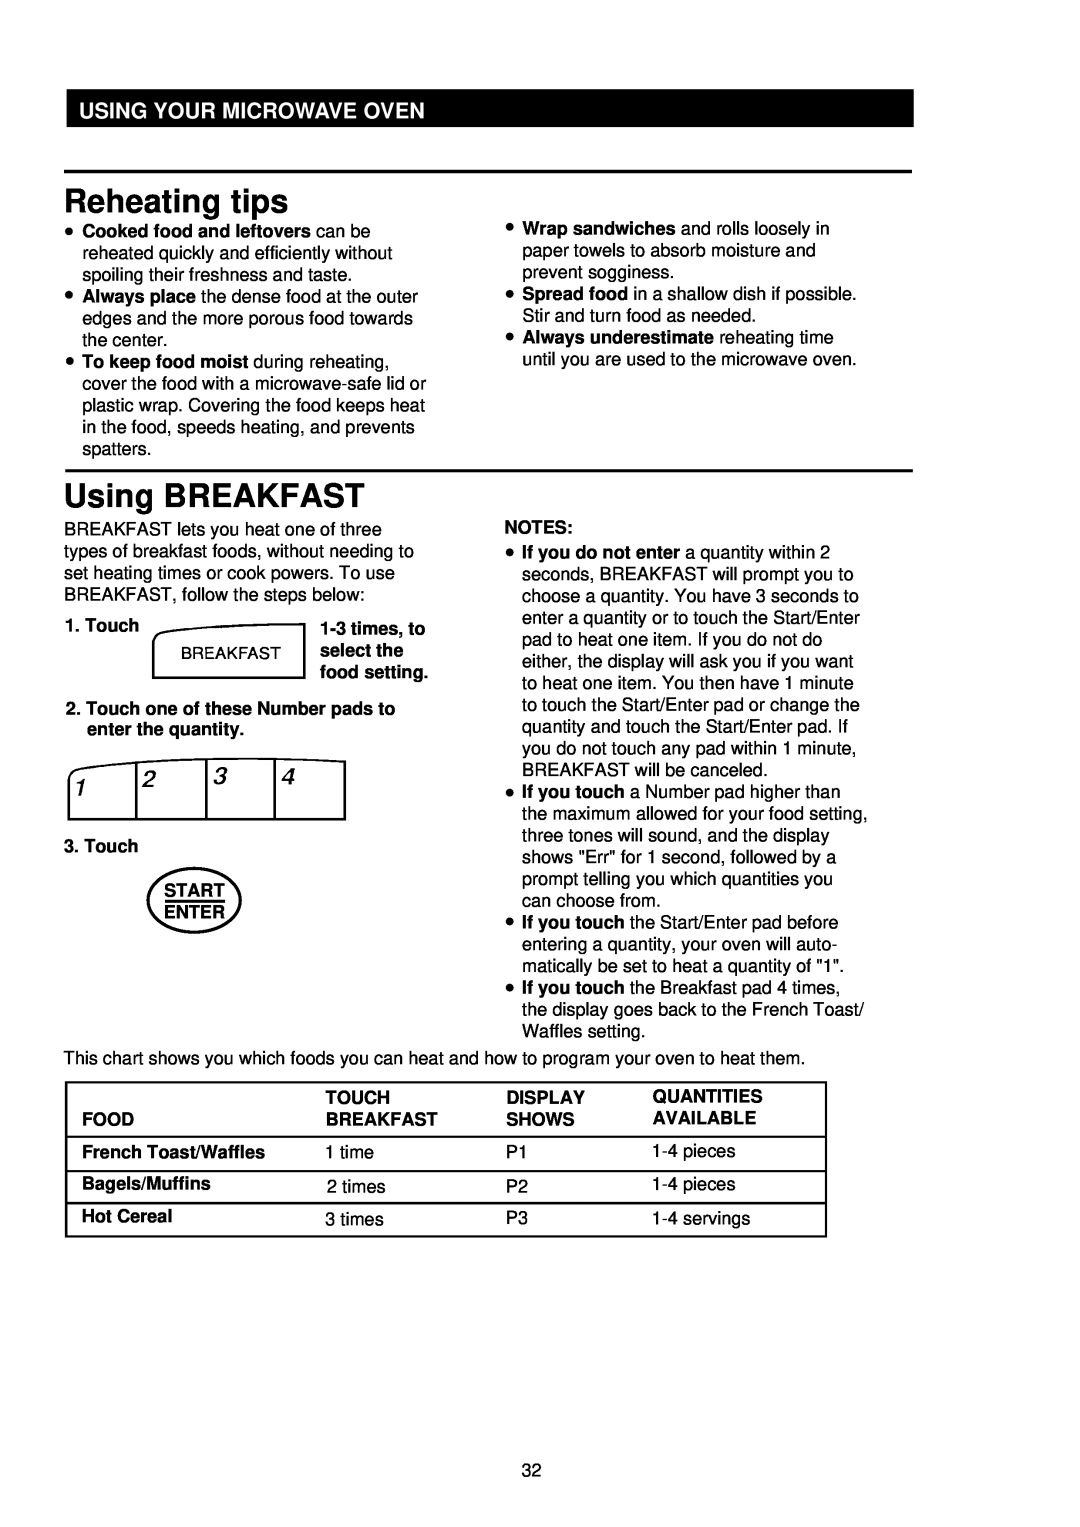 Palsonic PMO-850, PMO-888 installation instructions Reheating tips, Using BREAKFAST, Using Your Microwave Oven 